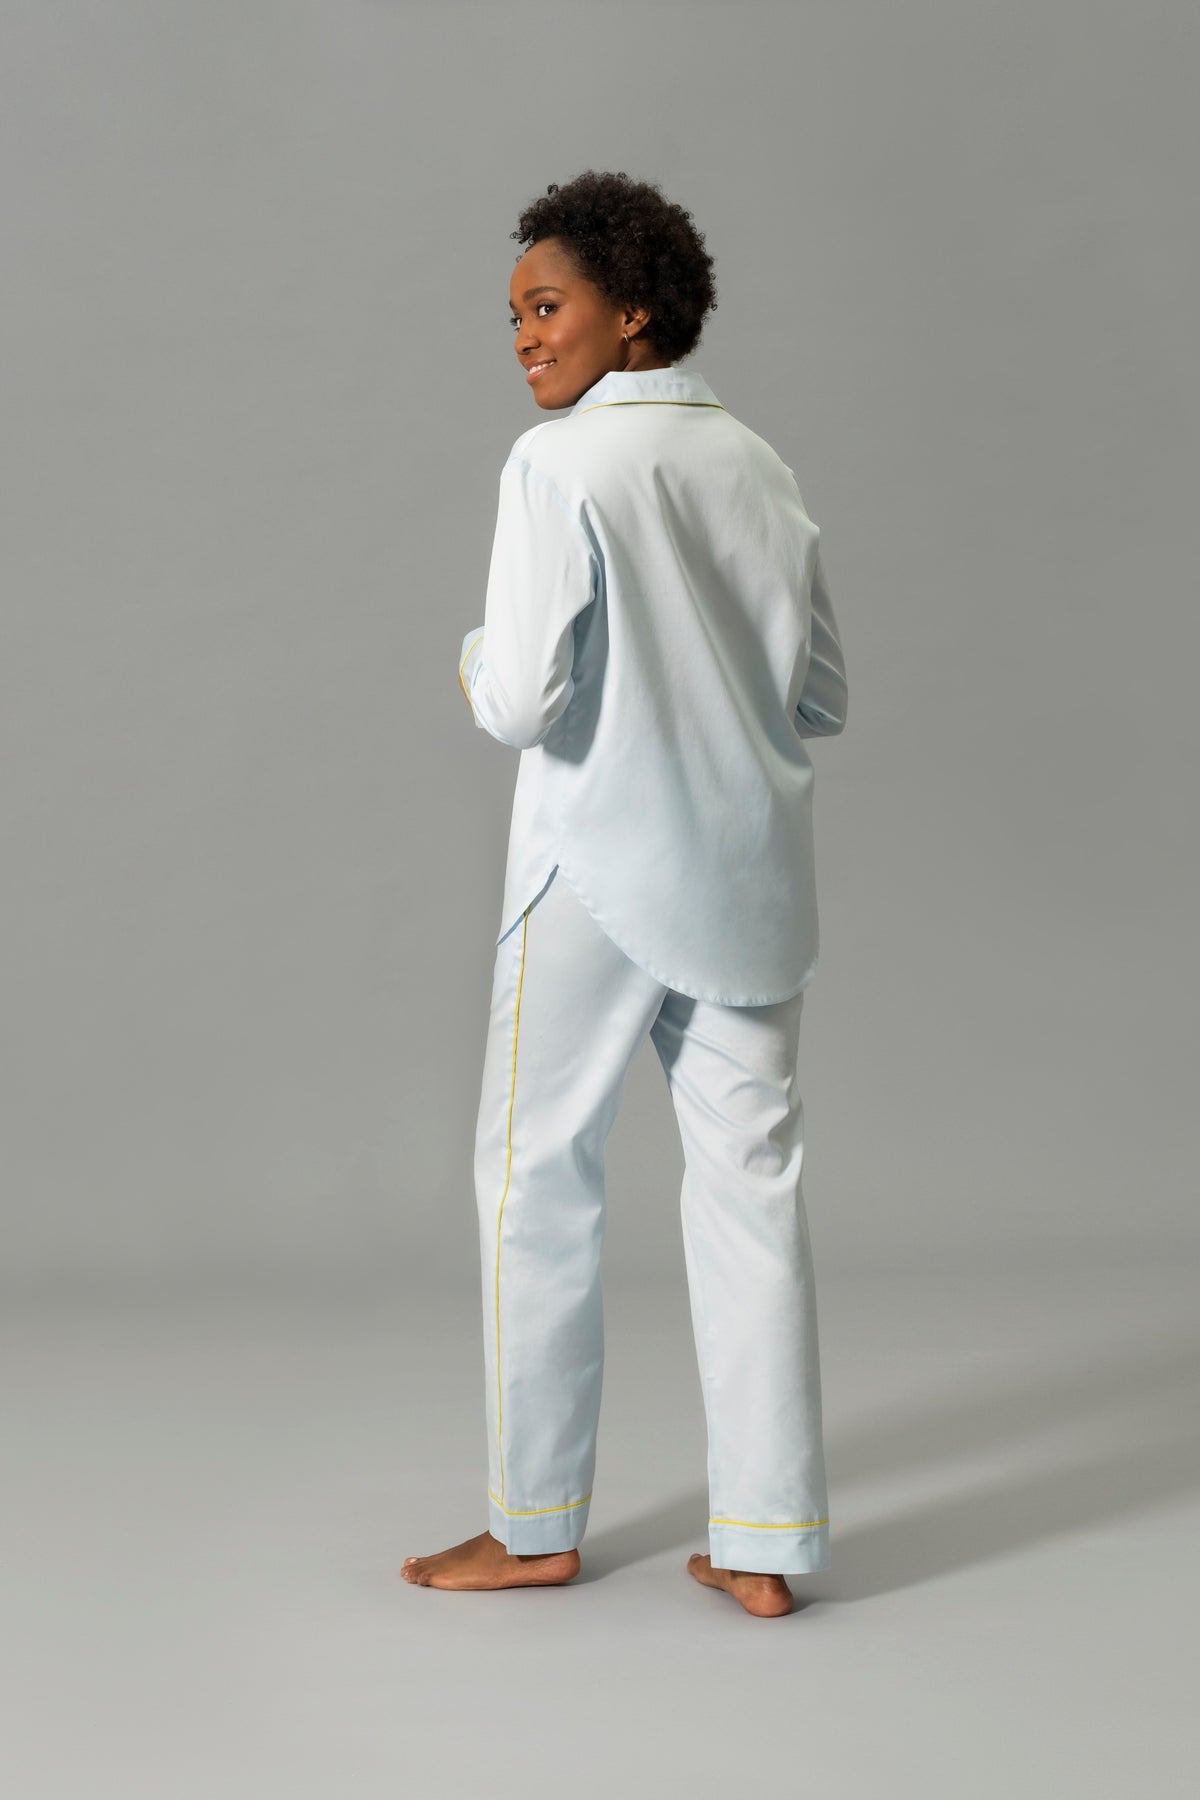 Back View of Model Wearing Matouk Nocturne Pajama Set in Color Blue and Lemon